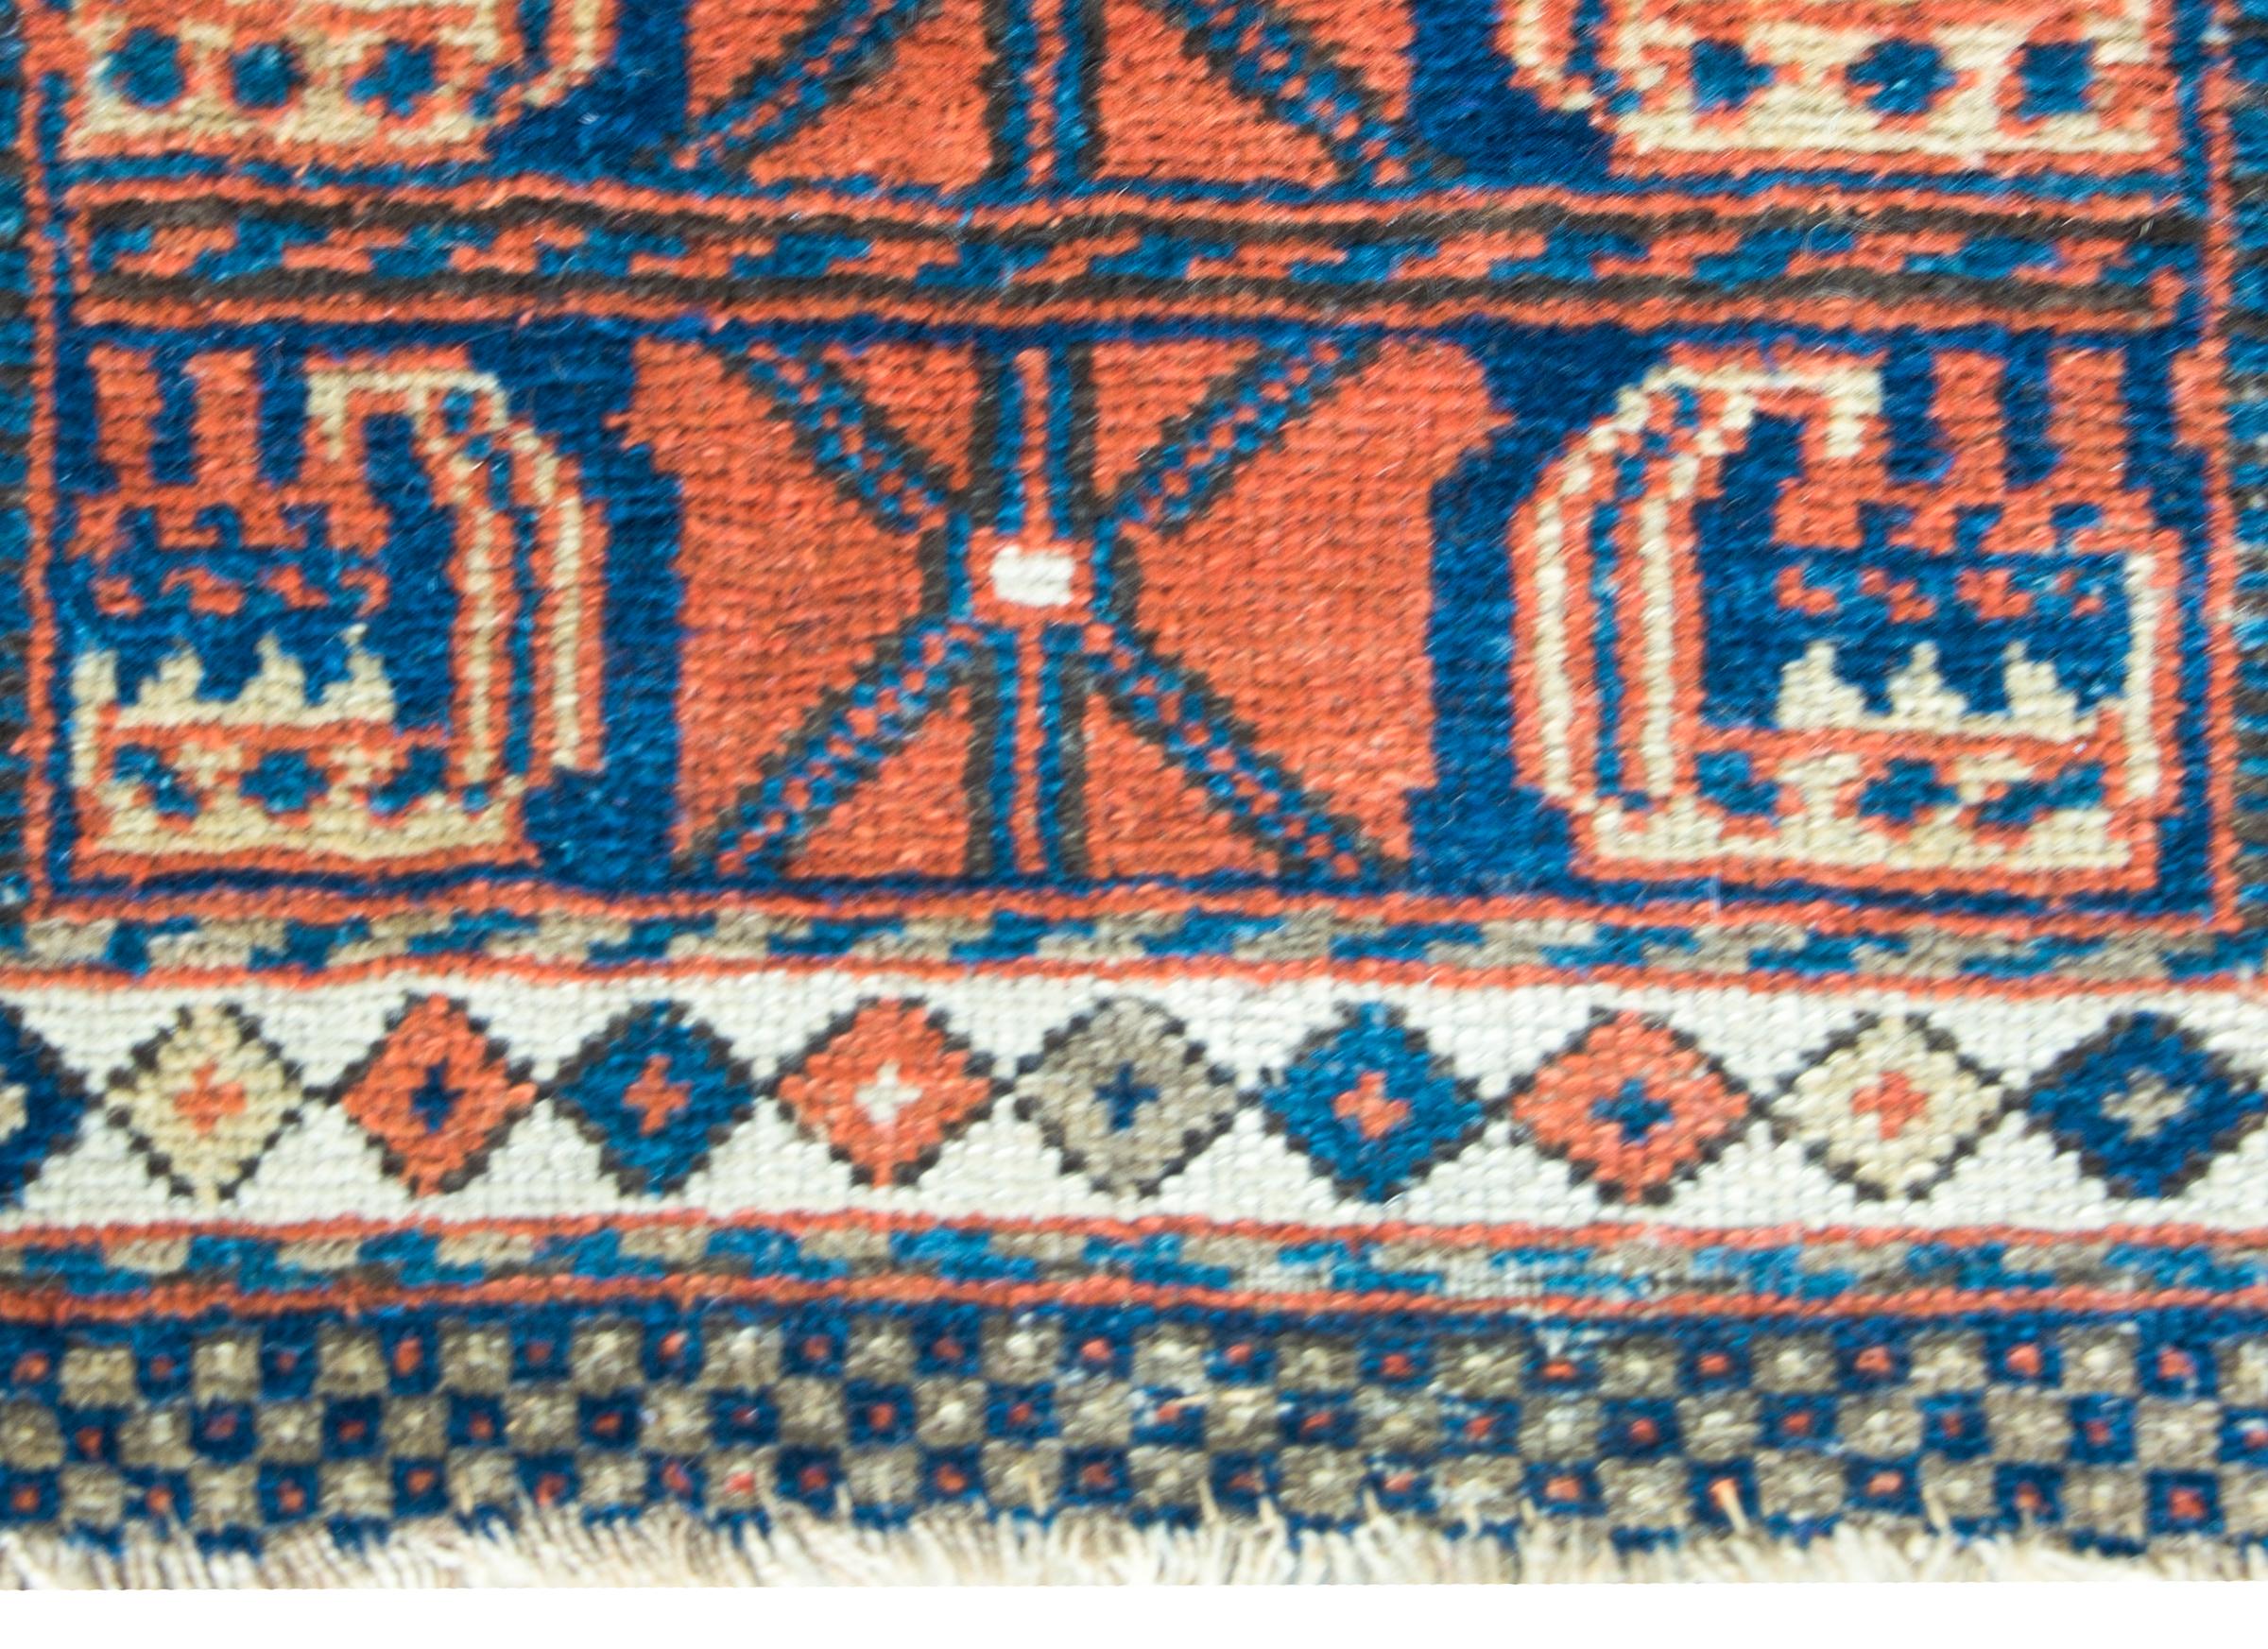 A beautiful early 20th century Kurdish bag face rug with a simple but modern pattern containing two large crimson stylized flowers and leaves set against an indigo background.  The border is simple with a petite diamond pattern.